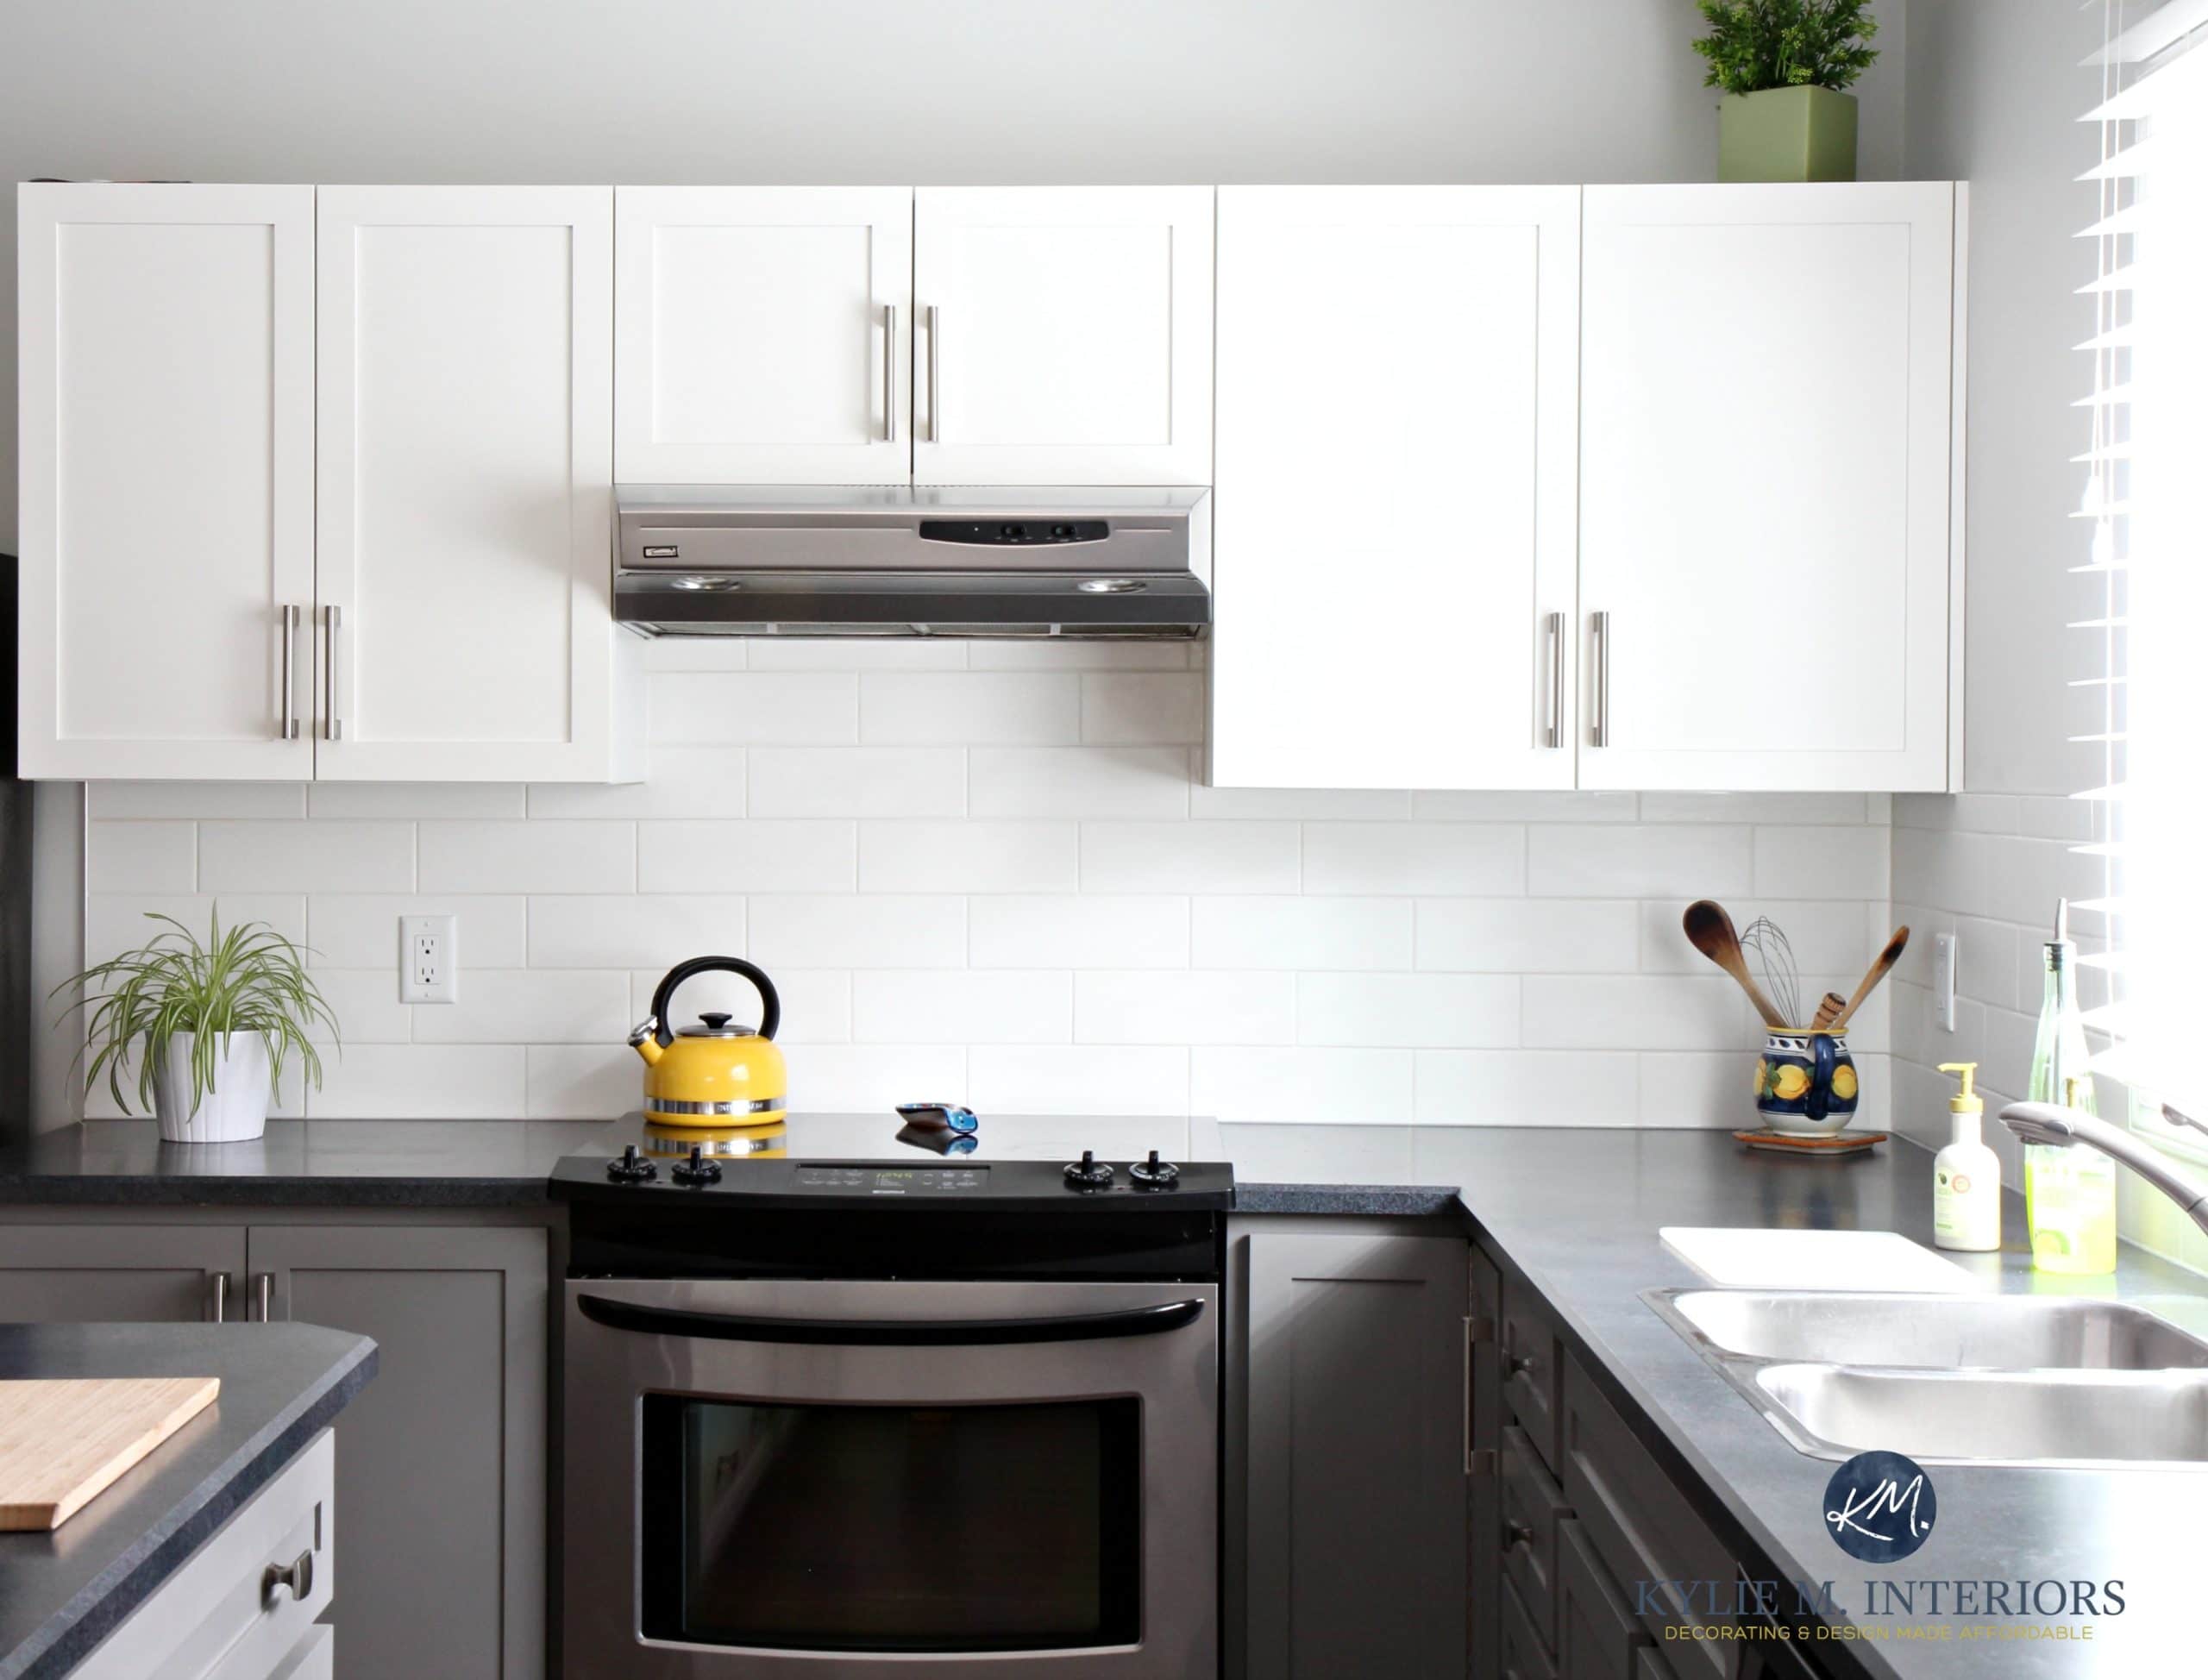 Painted kitchen cabinets. Benjamin Moore Chelsea Gray, Gray Owl, white subway tile, black laminate countertop. Budget friendly Kylie M Interiors E-design Colour expert (2)